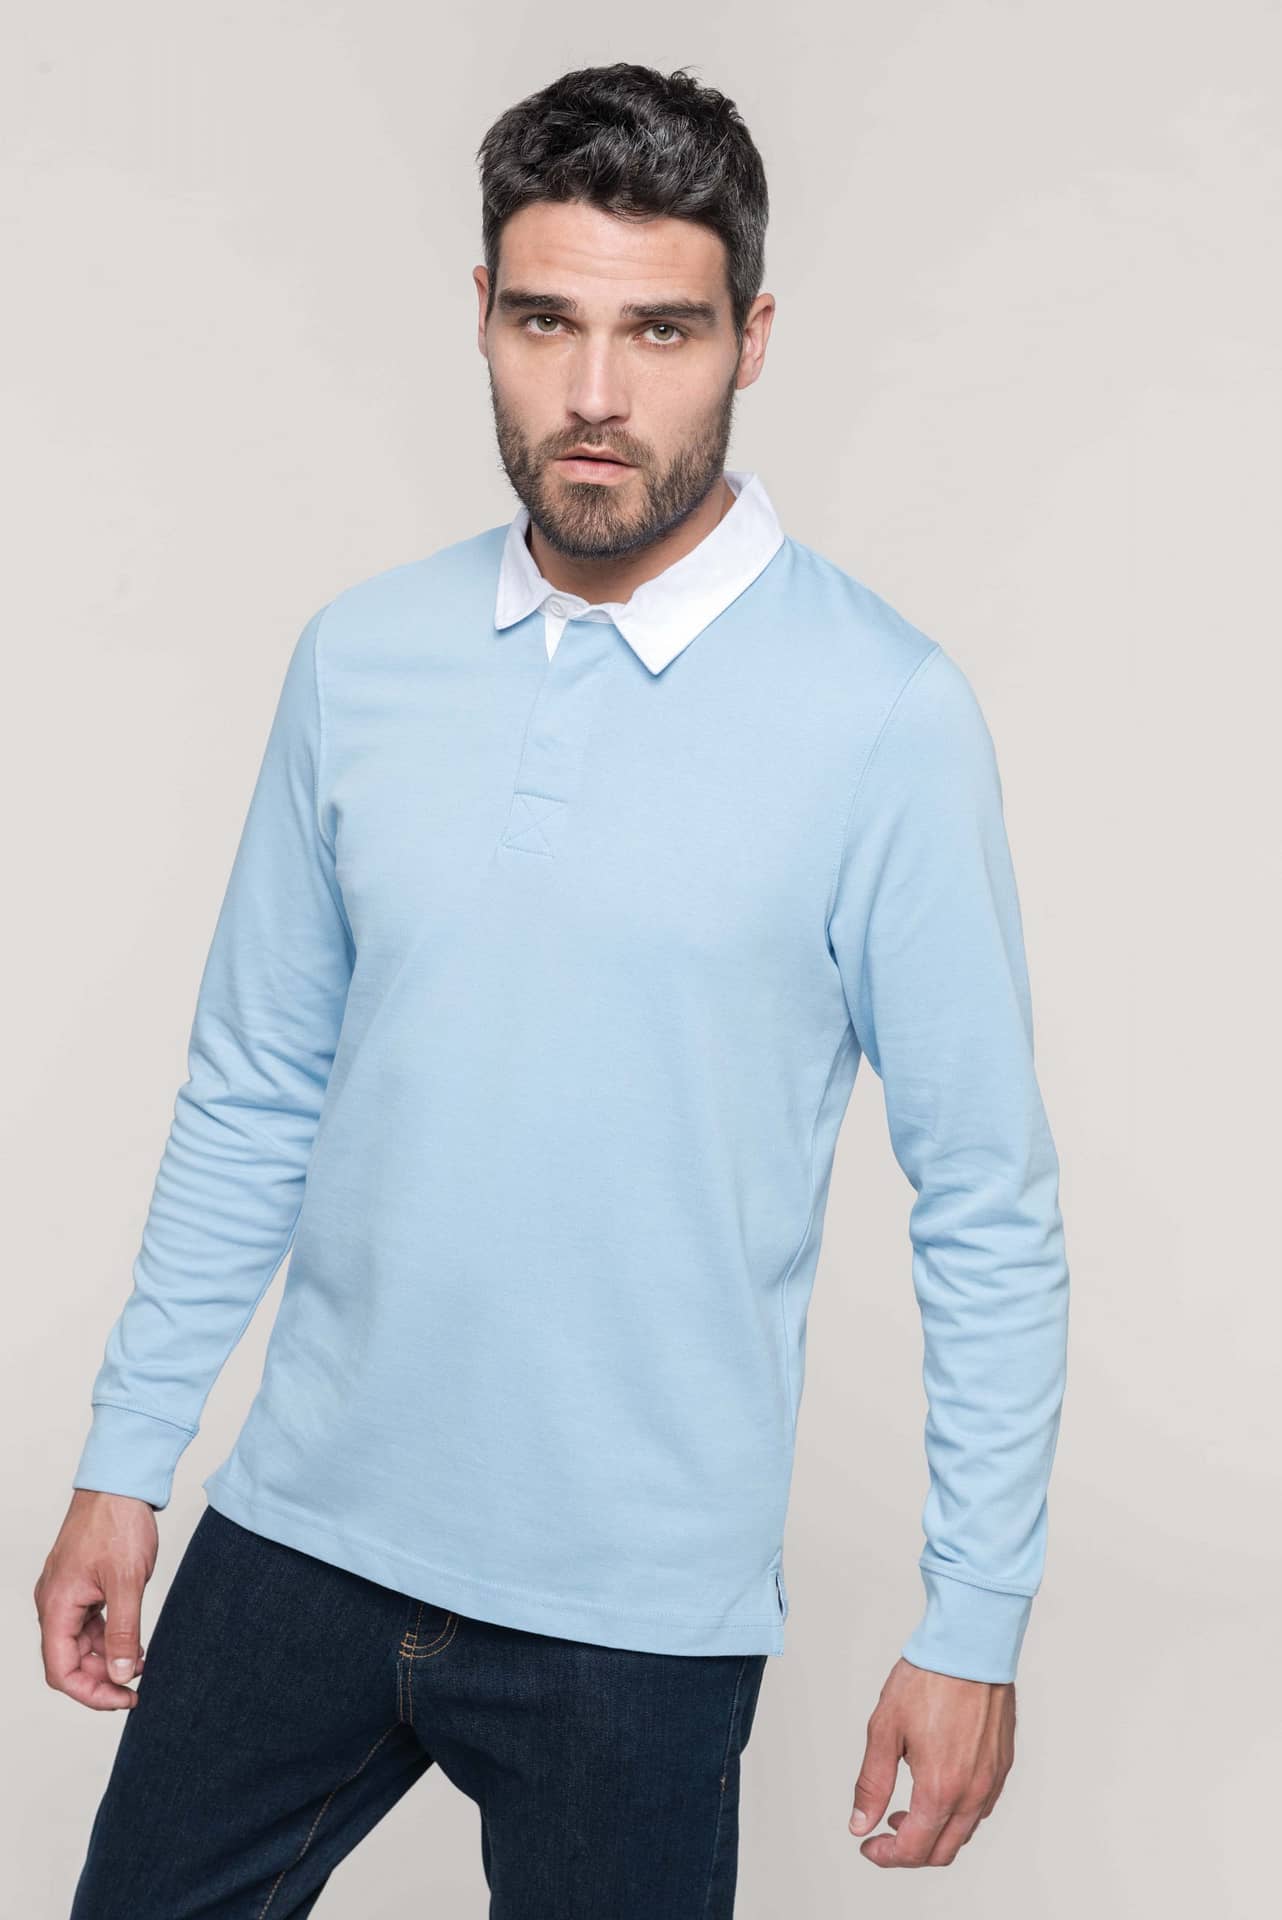 Rugby Polo Shirt Men